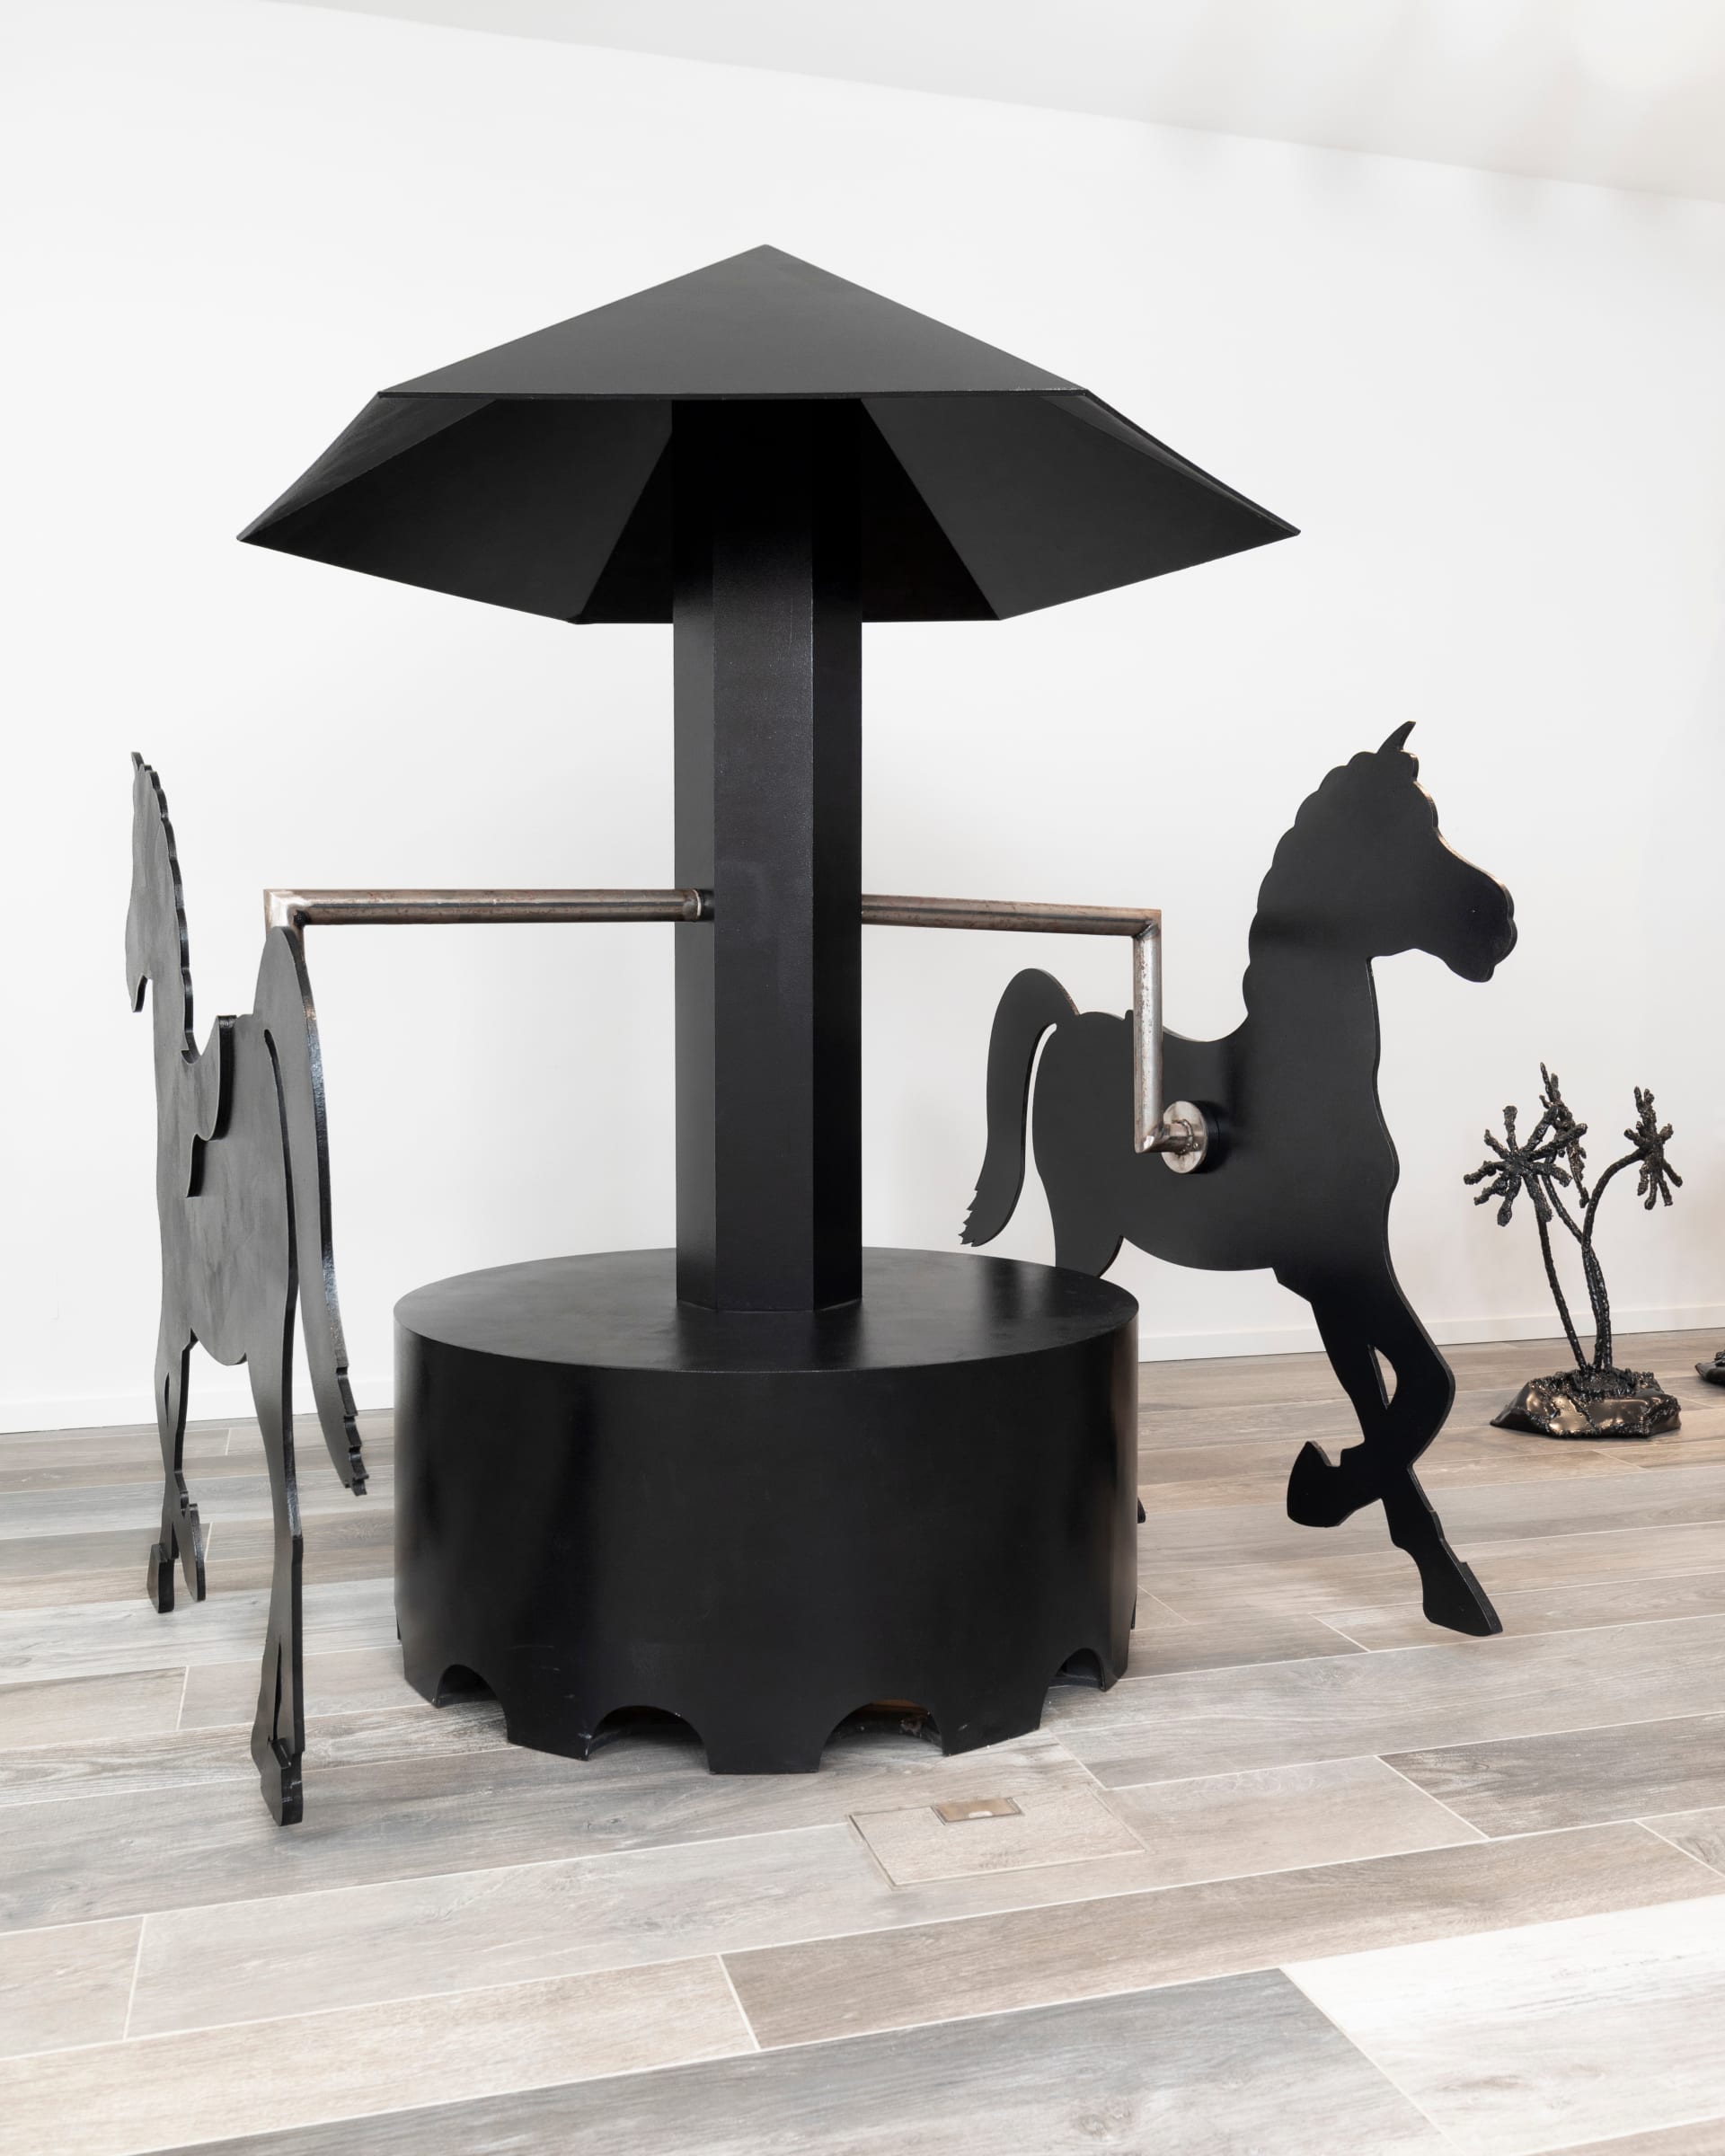 Marian Lee, Gaits of Hell: Sisyphus and the never-ending Carousel, 2020 |  STUDIO WEST